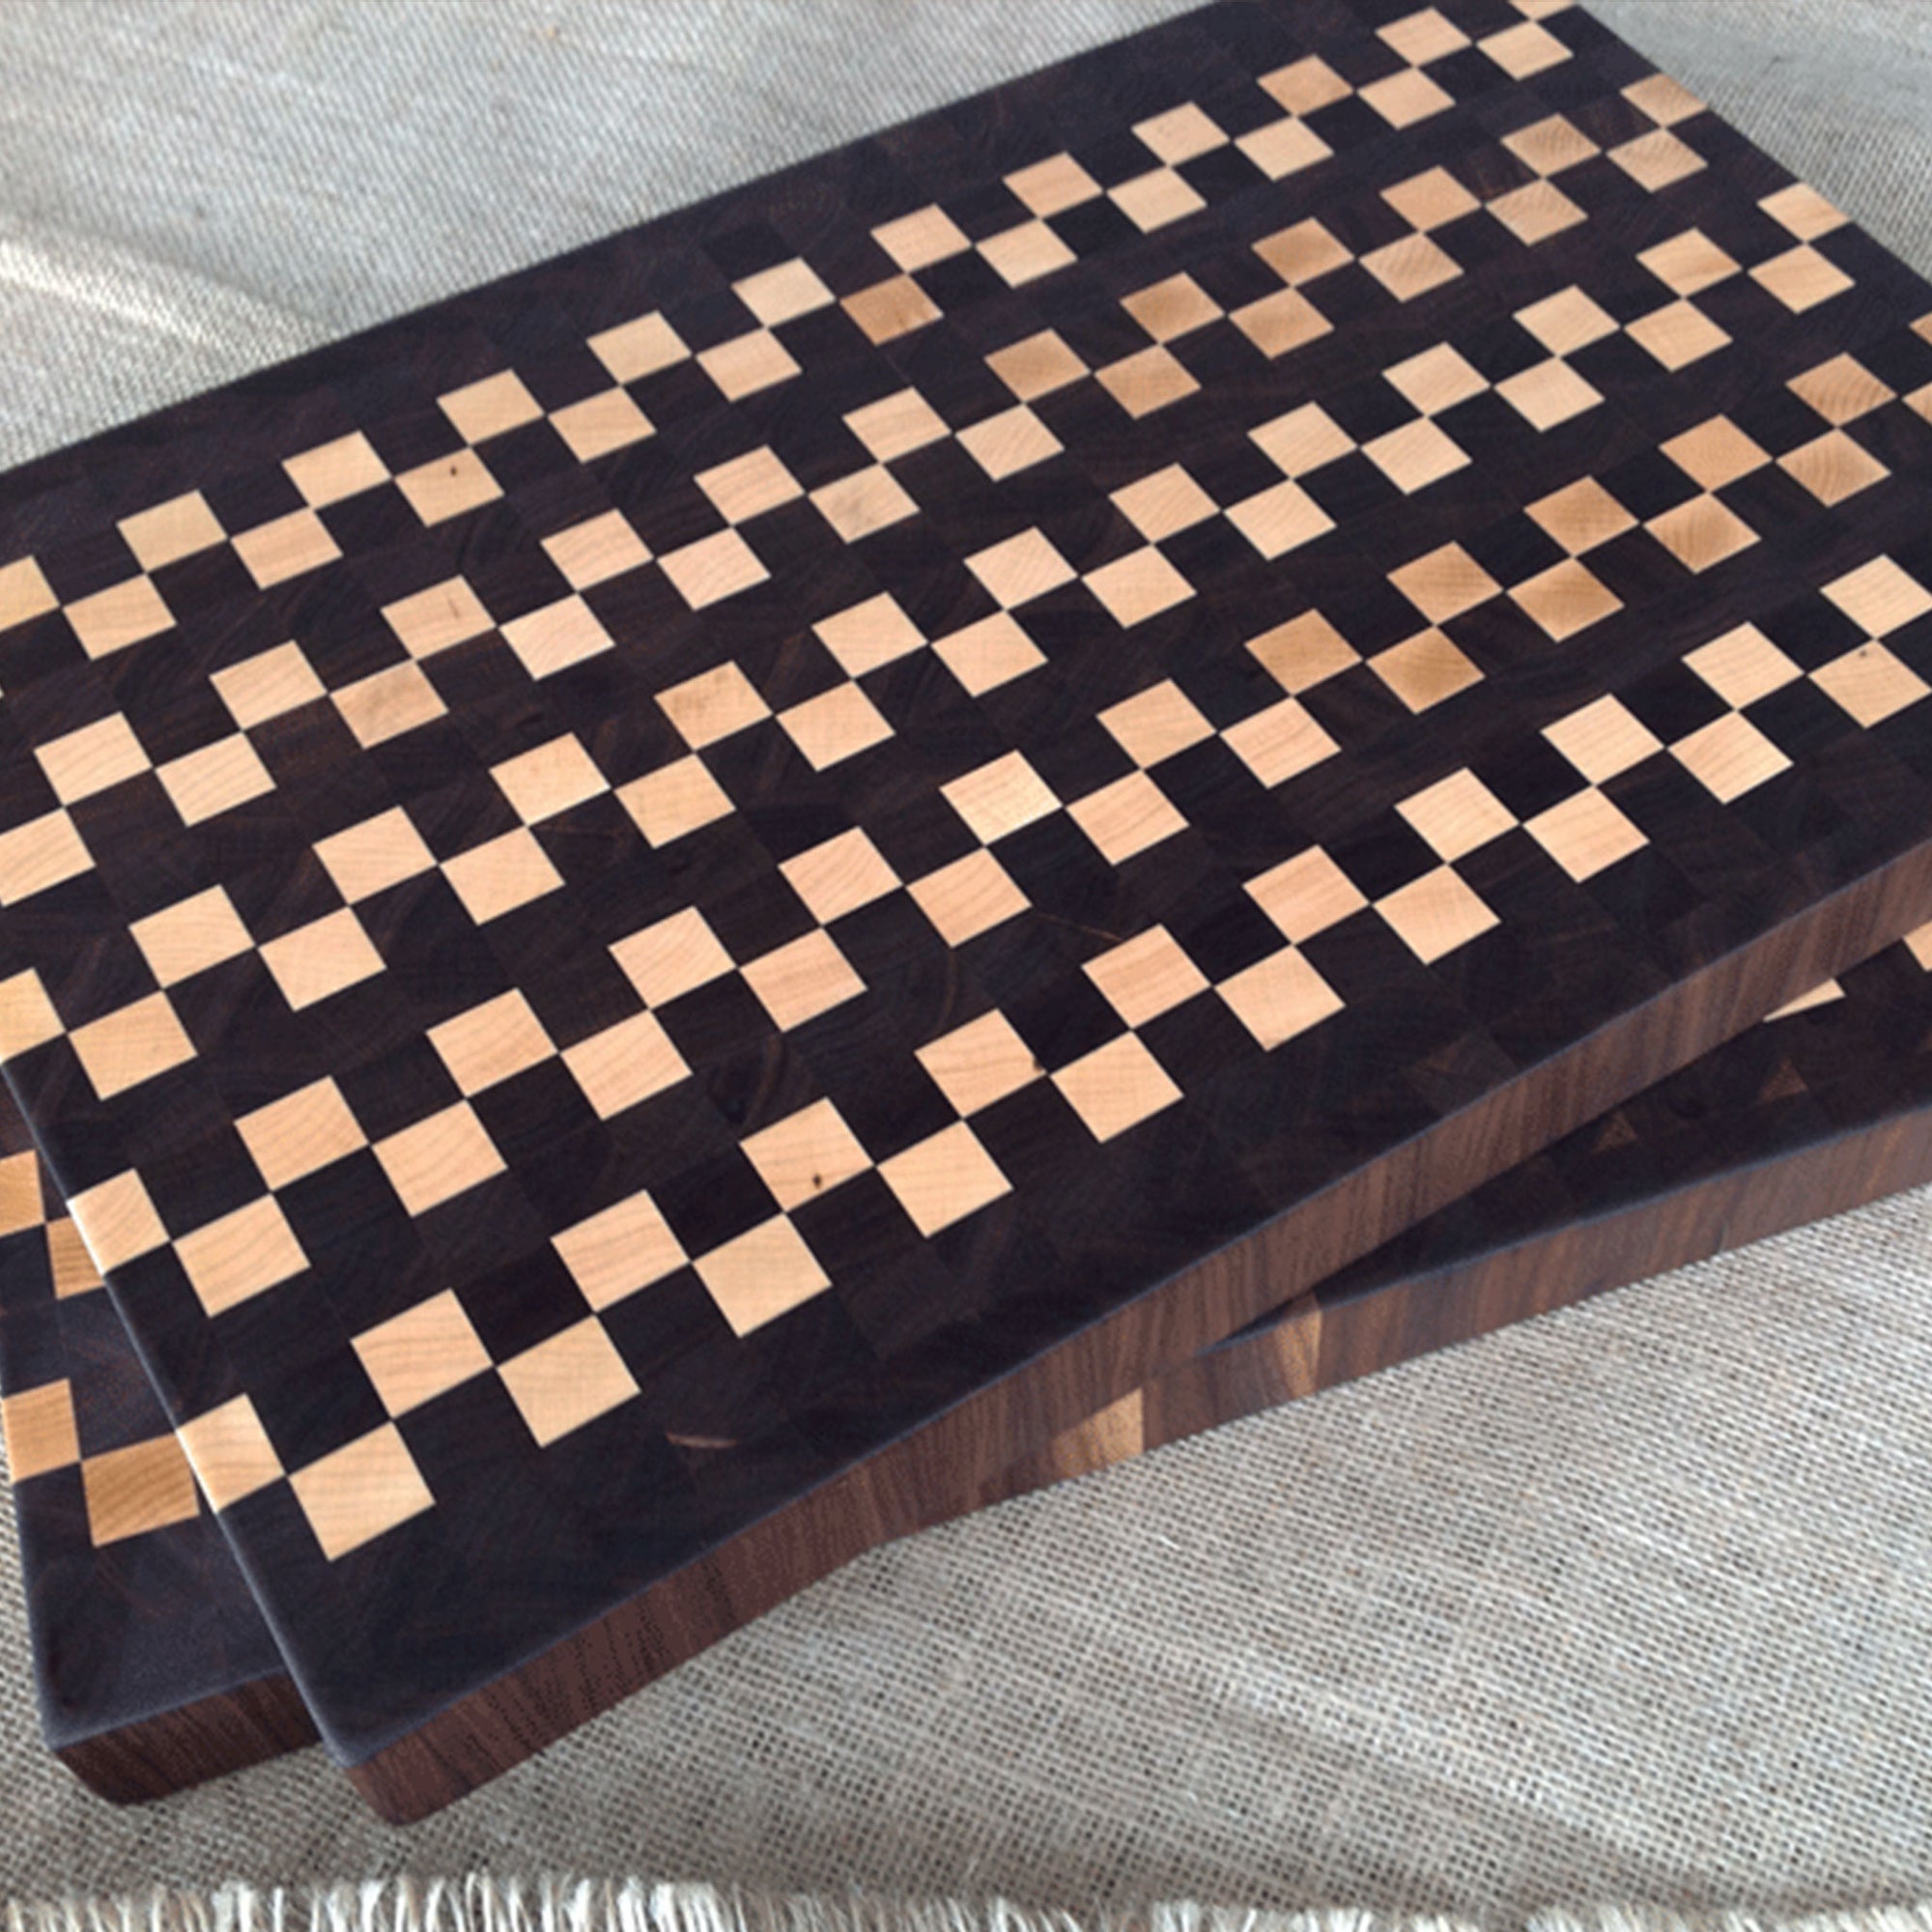 The Making of a Black Walnut and Maple End Grain Cutting Board